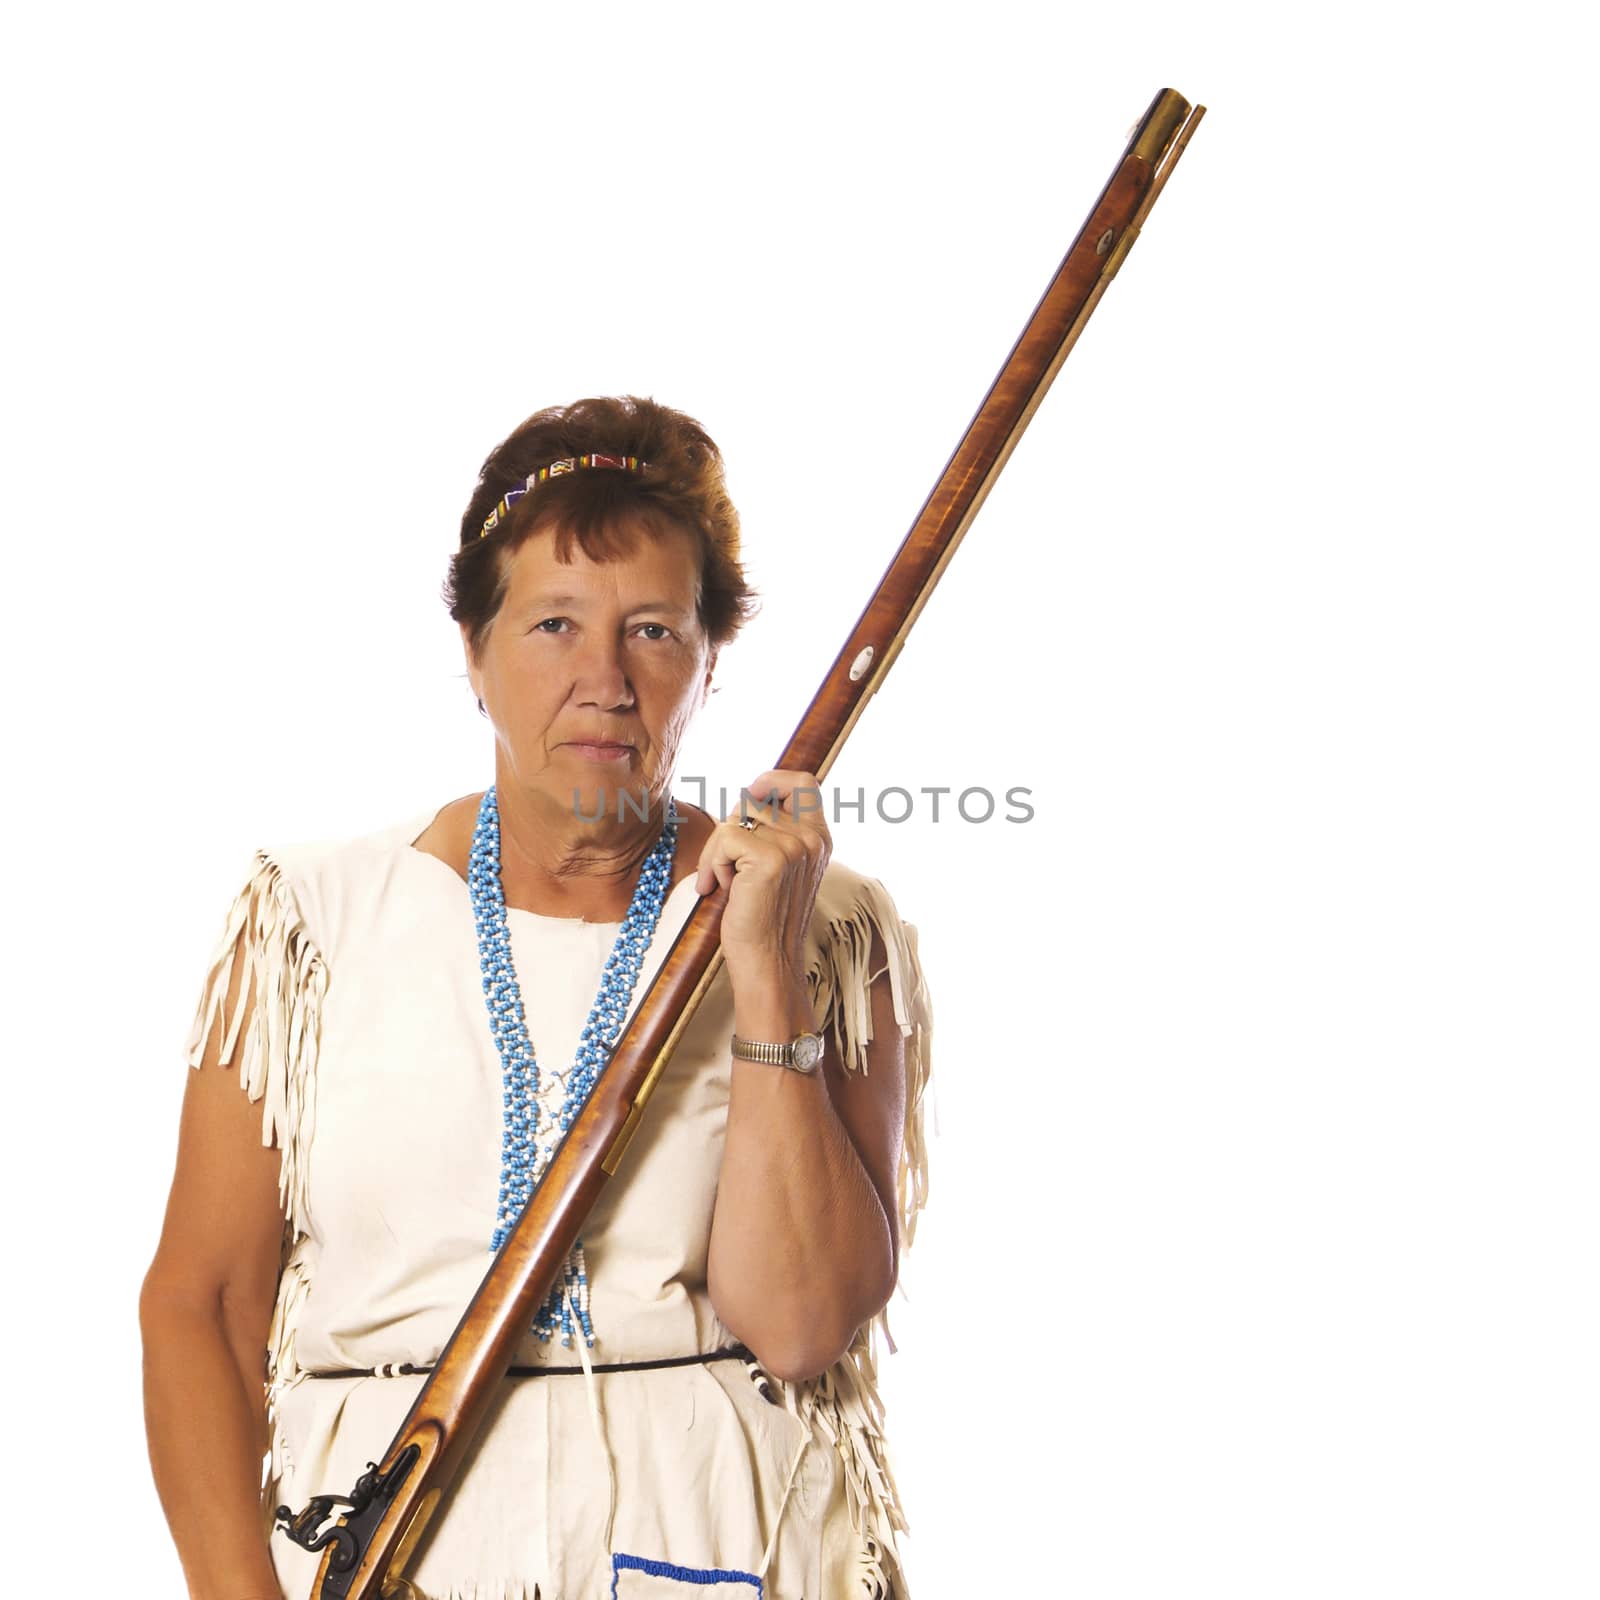 Pioneer Woman With Black Powder Rifle by rcarner